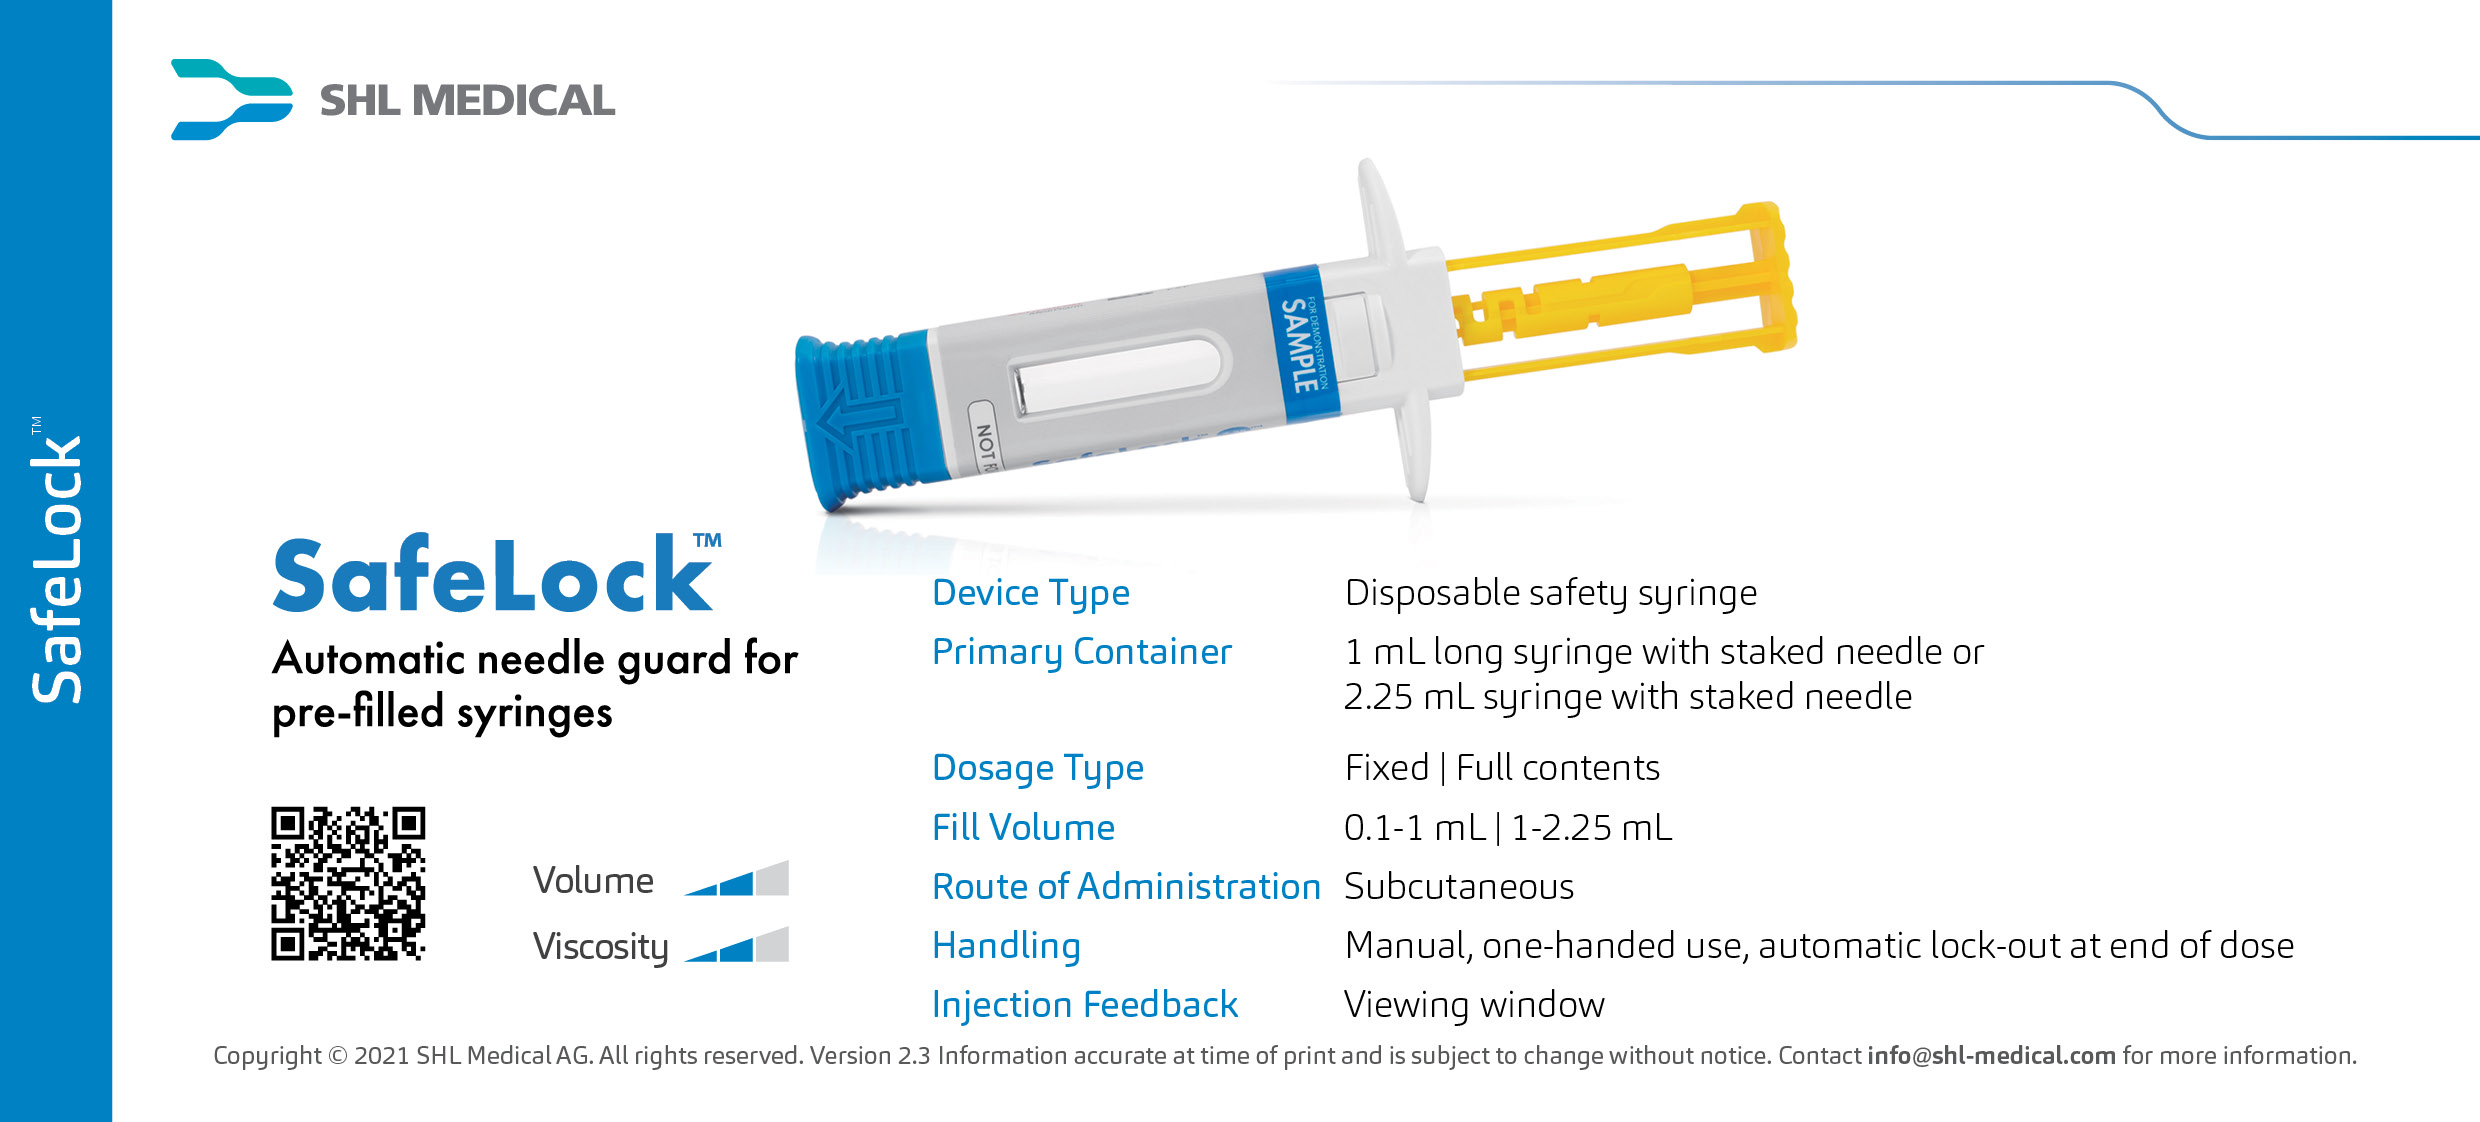 Product card of Safelock™ disposable safety syringe developed by SHL Medical featuring its device specifications and handling instructions